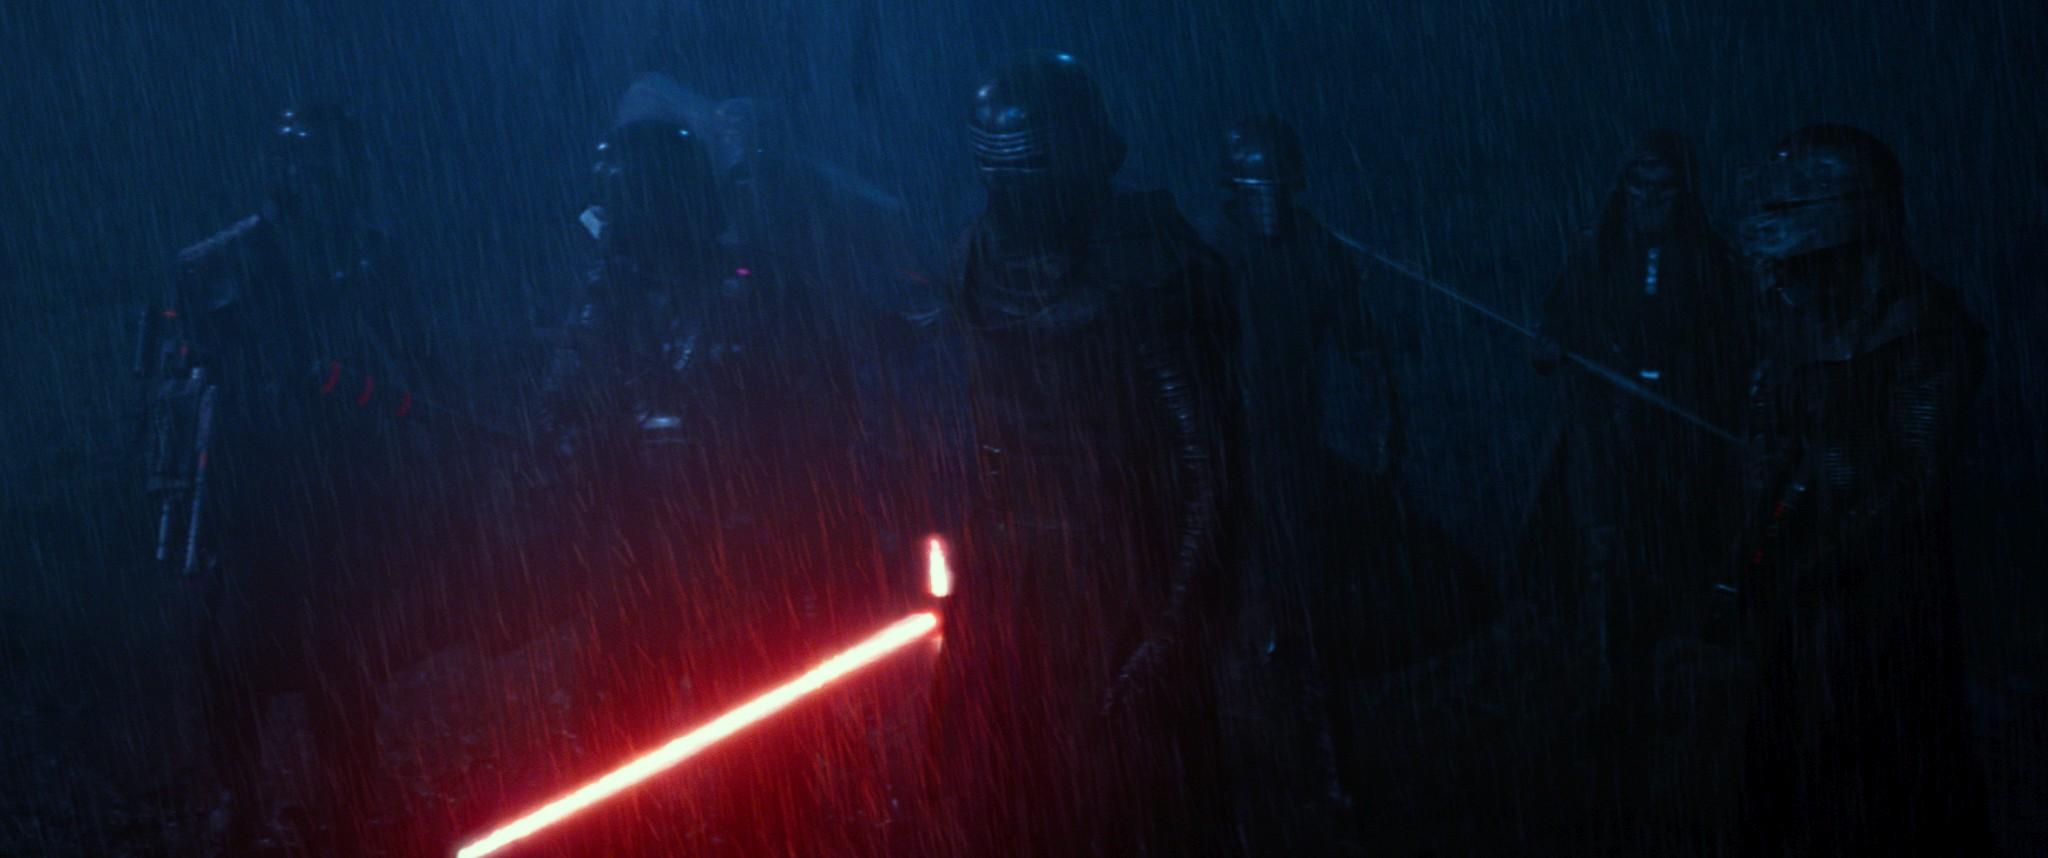 Star Wars Episode VII: The Force Awakens Wallpaper and Background